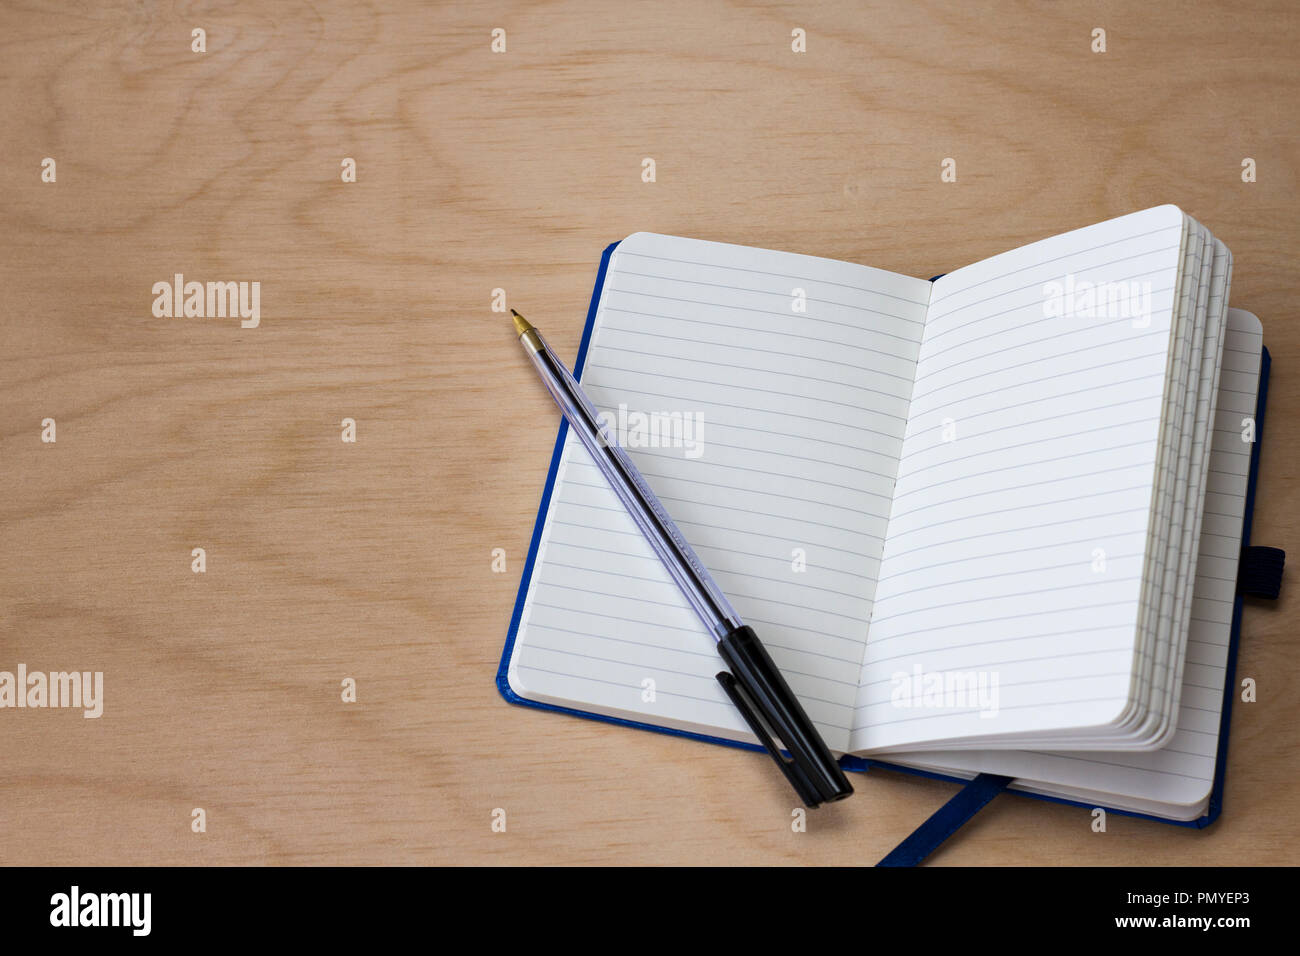 Notebook and black biro pen on a light wood background Stock Photo